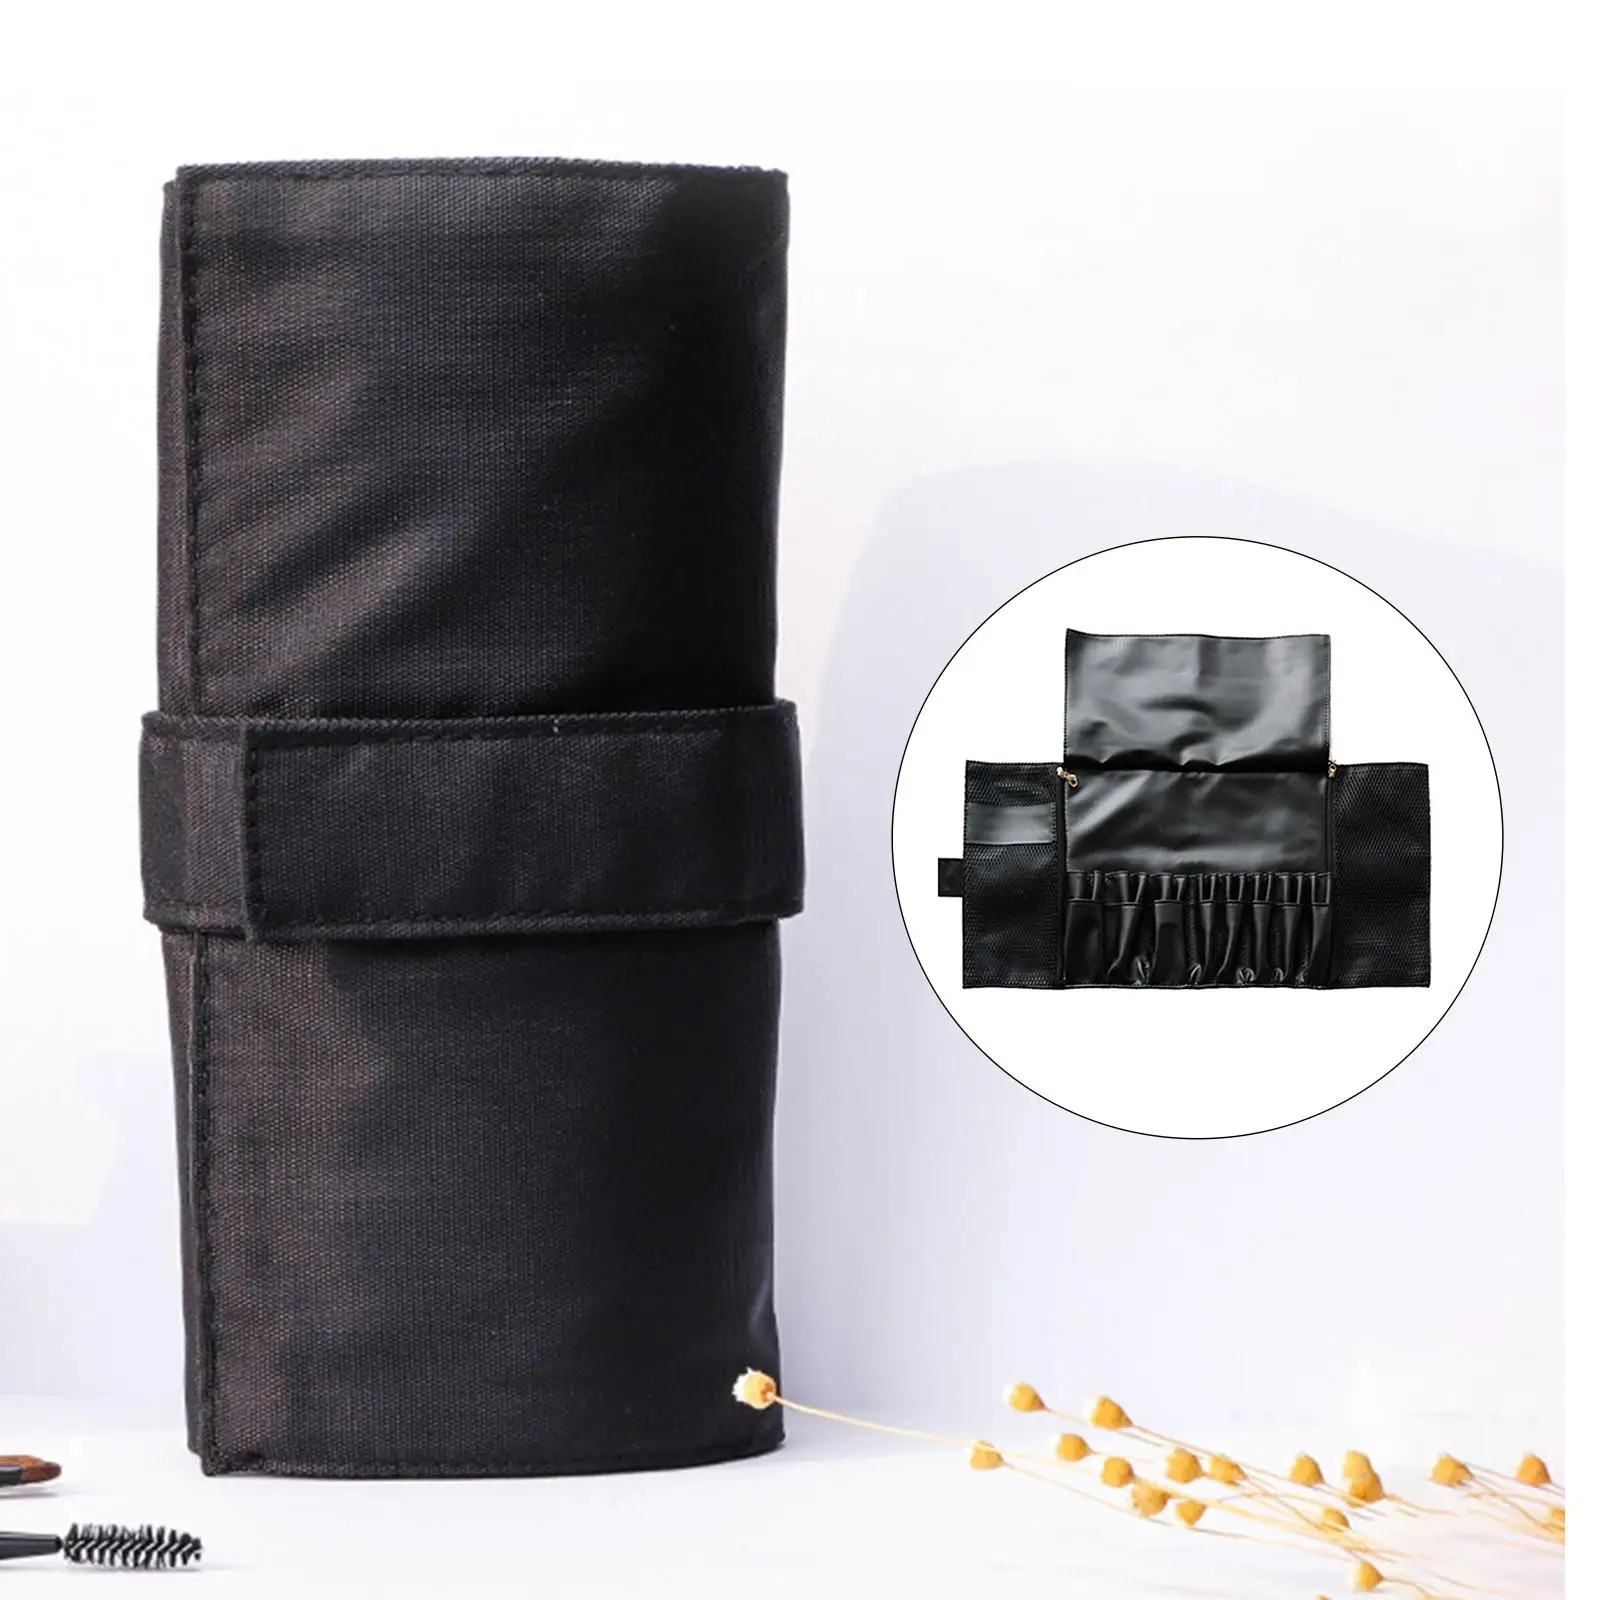  Pack, Multi Pockets Professional Pouch Case Adjustable Foldable Portable  Holder for Travel (Brushes Not Included)